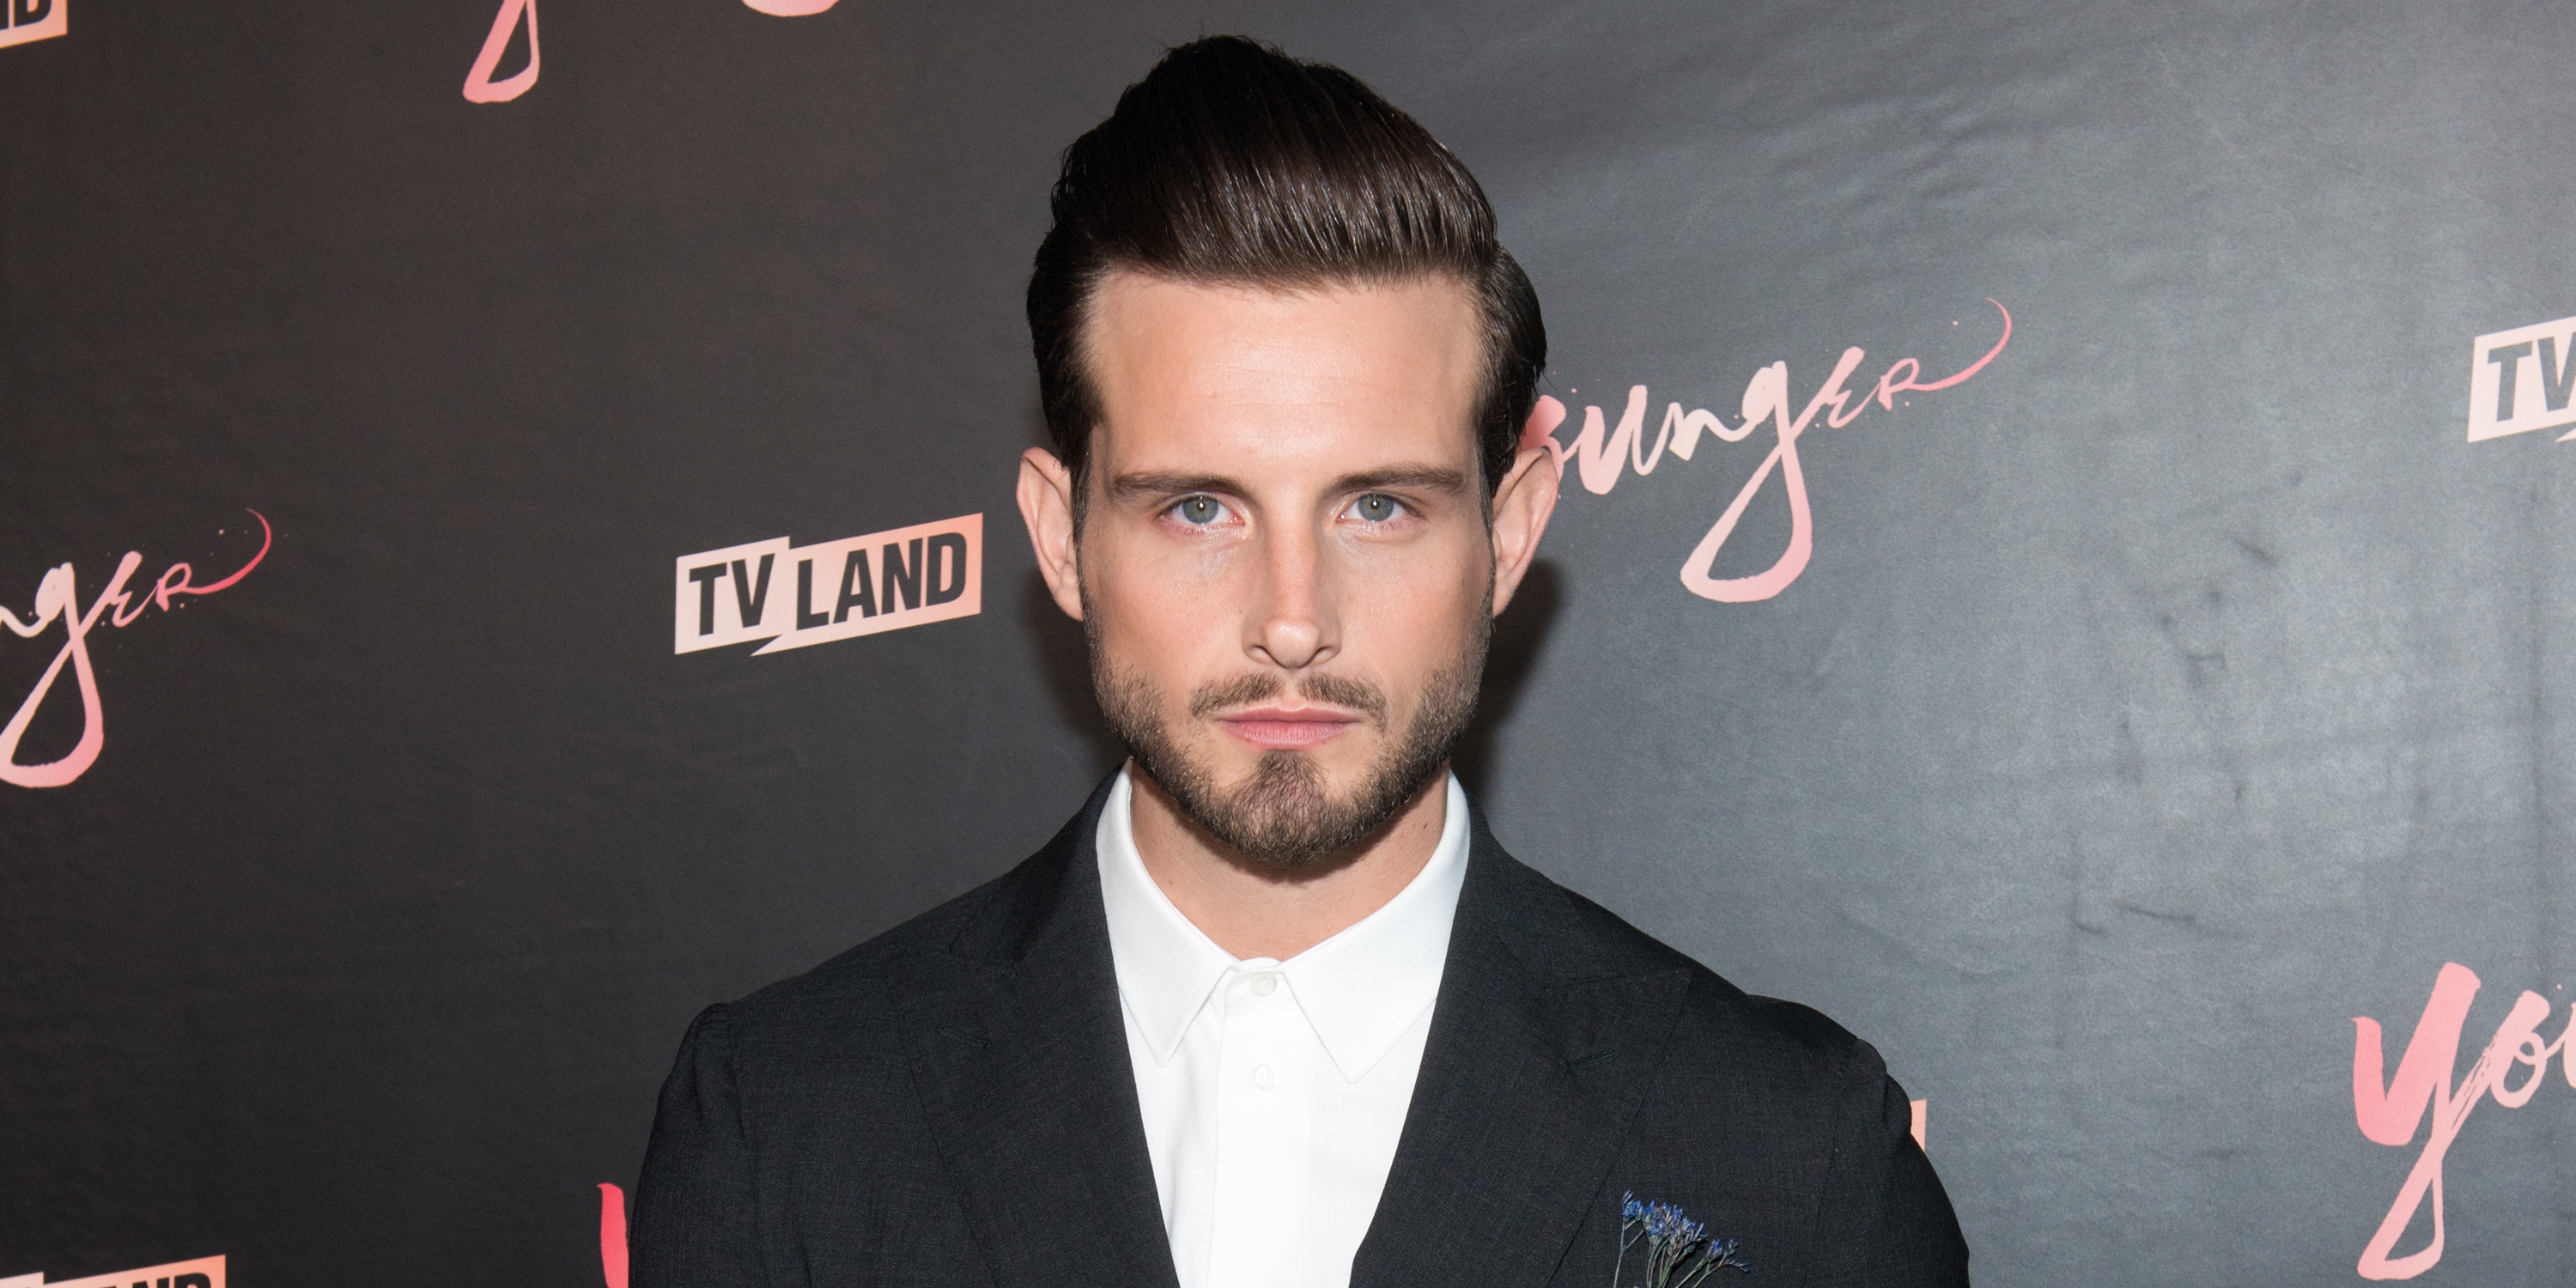 Tatted Bae Nico Tortorella To Play A Lead Role In Upcoming ‘The Walking Dead’ Spinoff